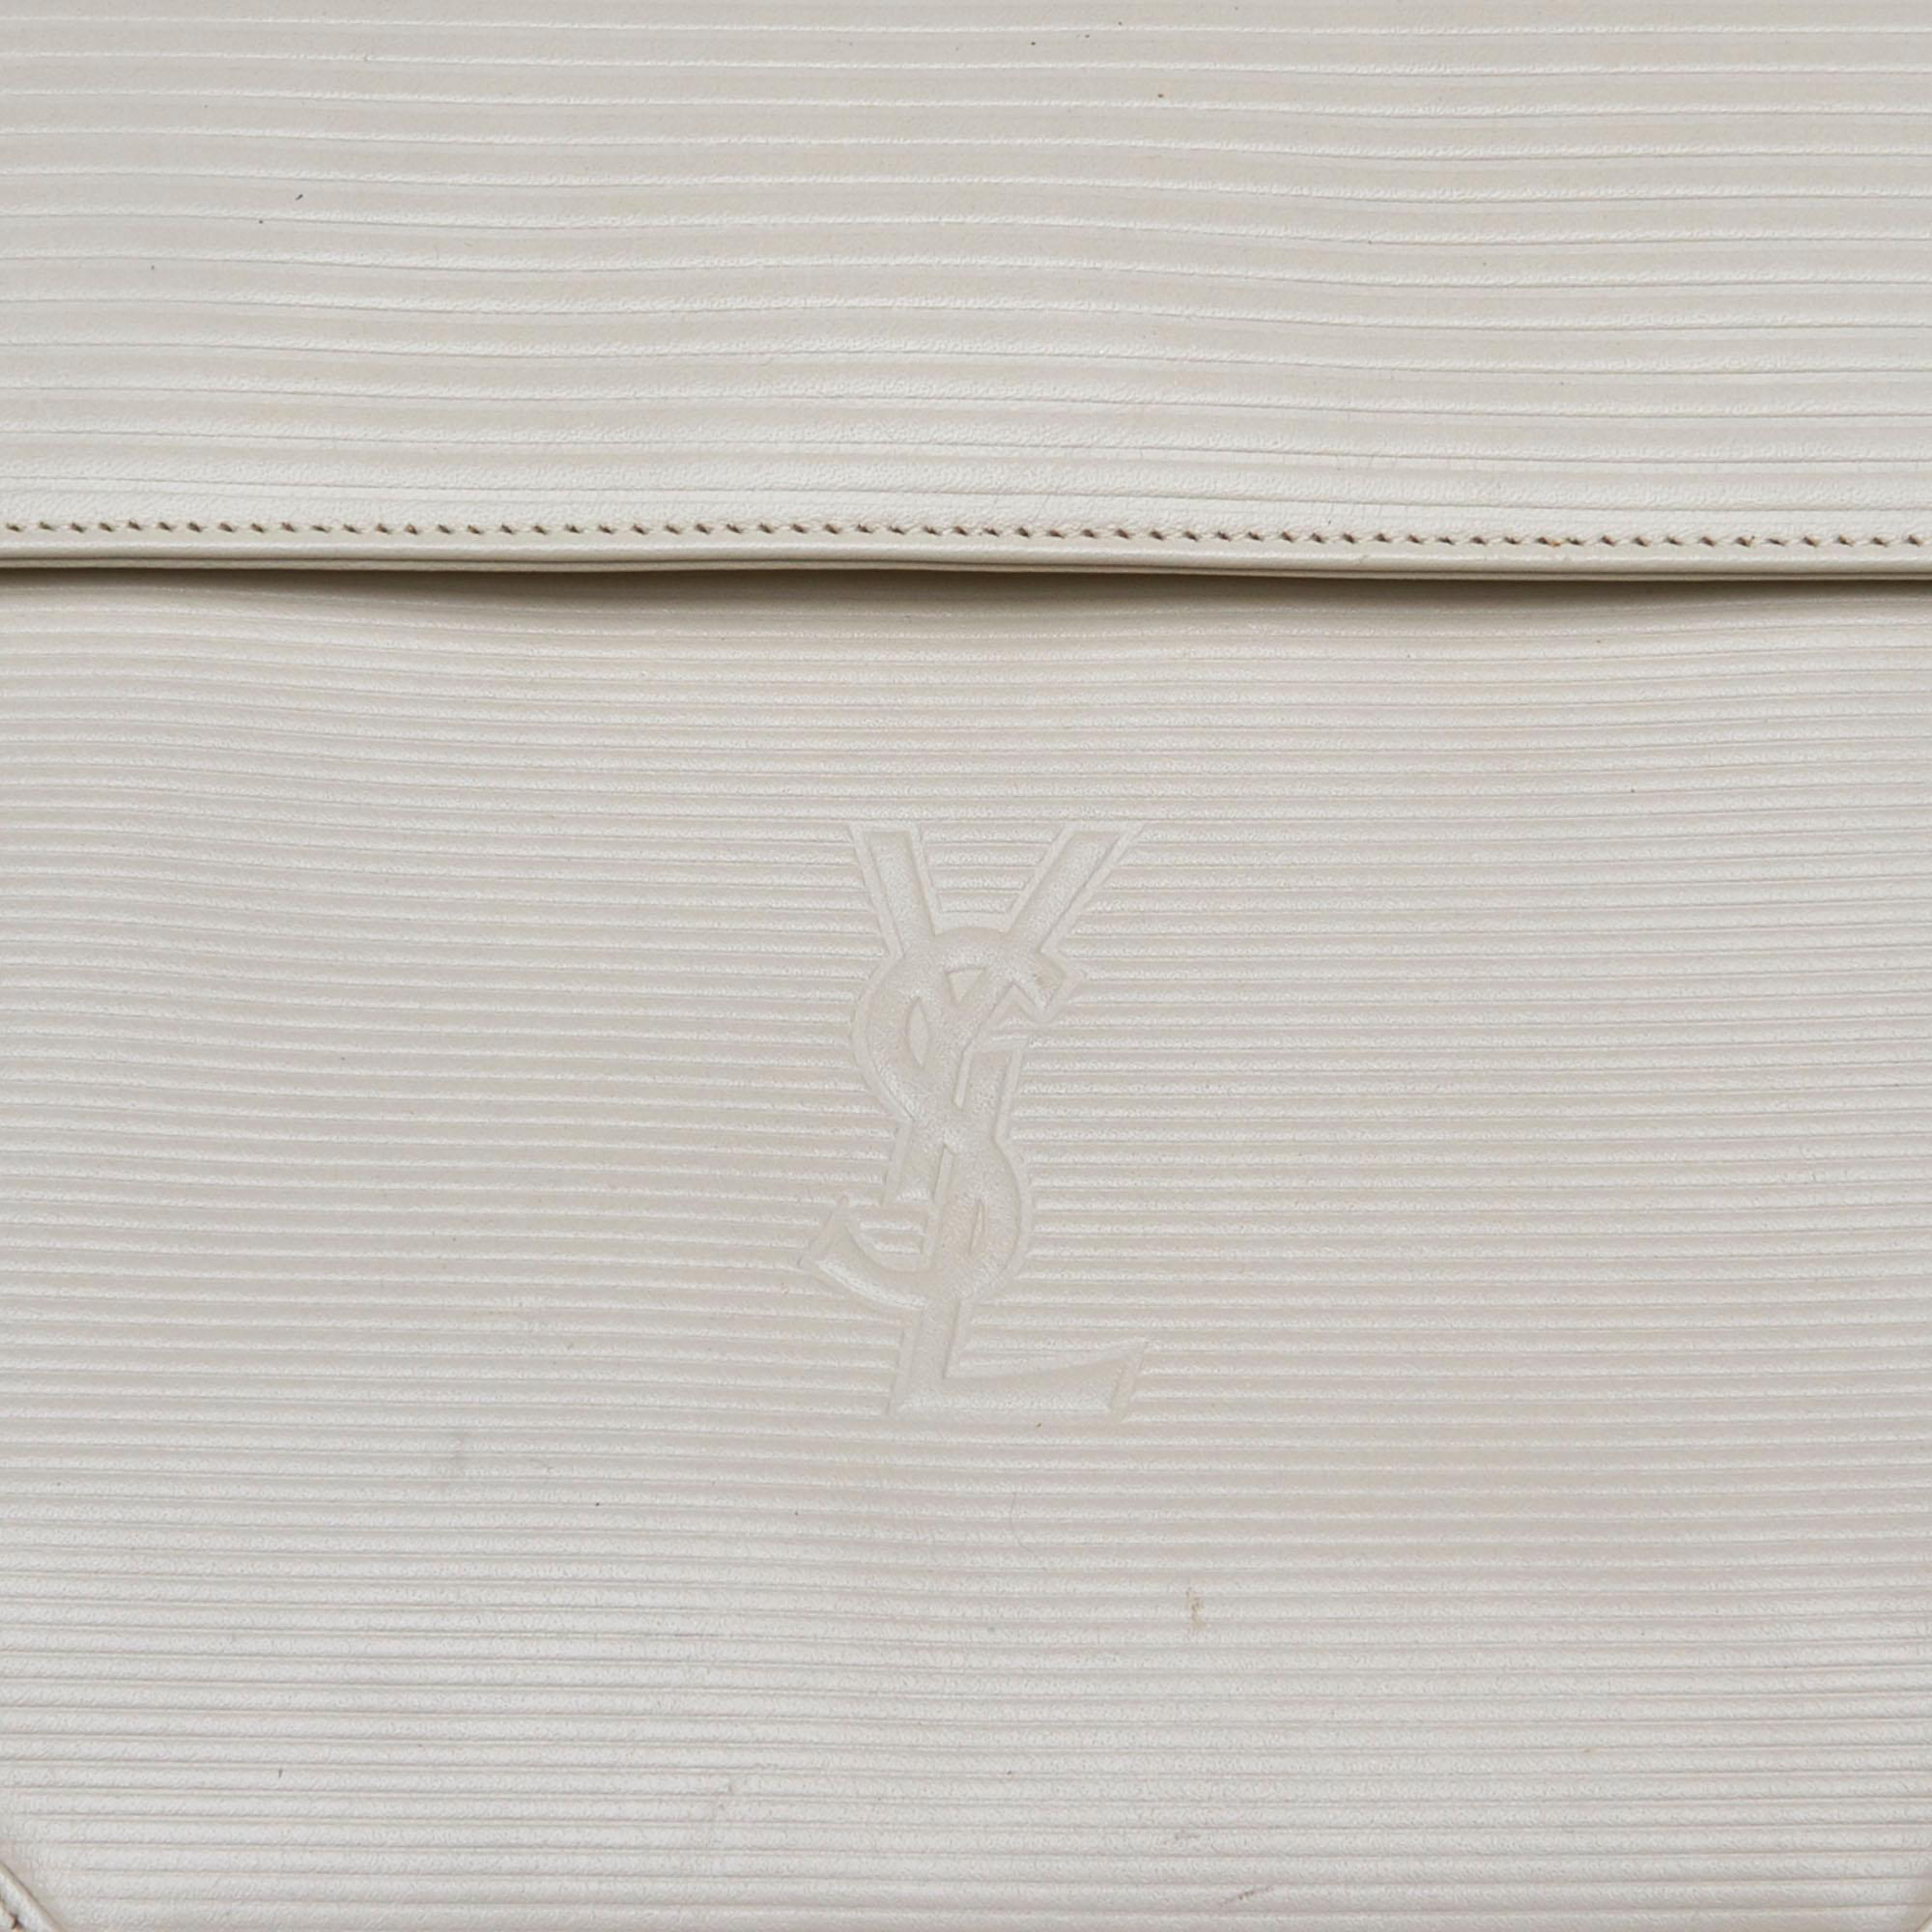 Vintage Authentic YSL White Leather Clutch Bag France SMALL  For Sale 3